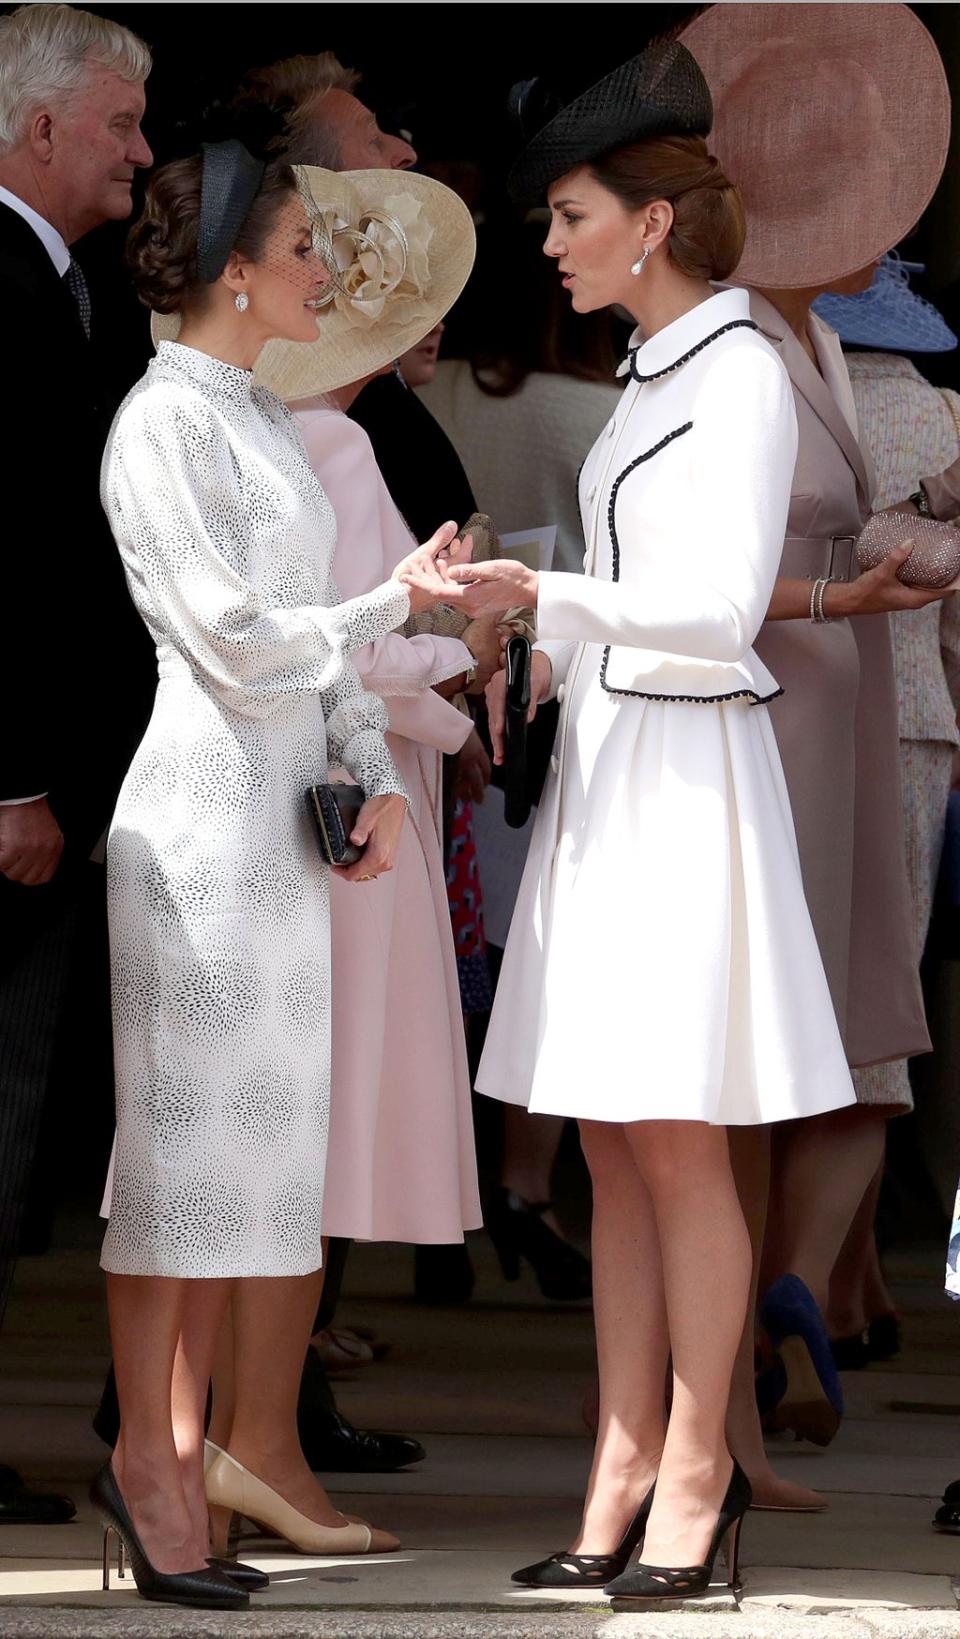 Queen Letizia of Spain and Catherine, Duchess of Cambridge at the Order of the Garter service, June 2019 (Getty Images)